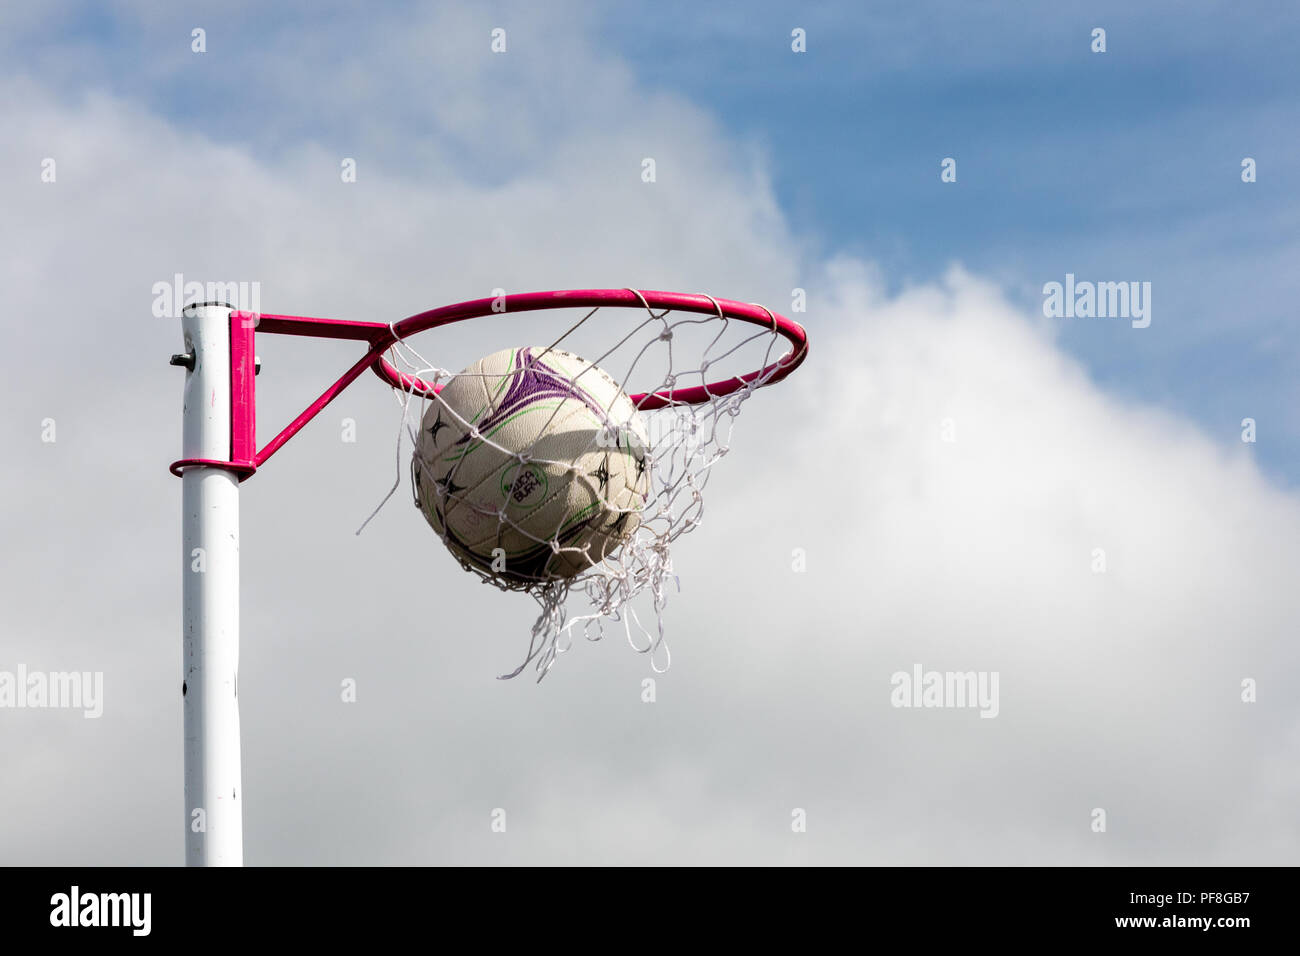 Netball posts with netball going through the net scoring a goal against a blue sky. Stock Photo